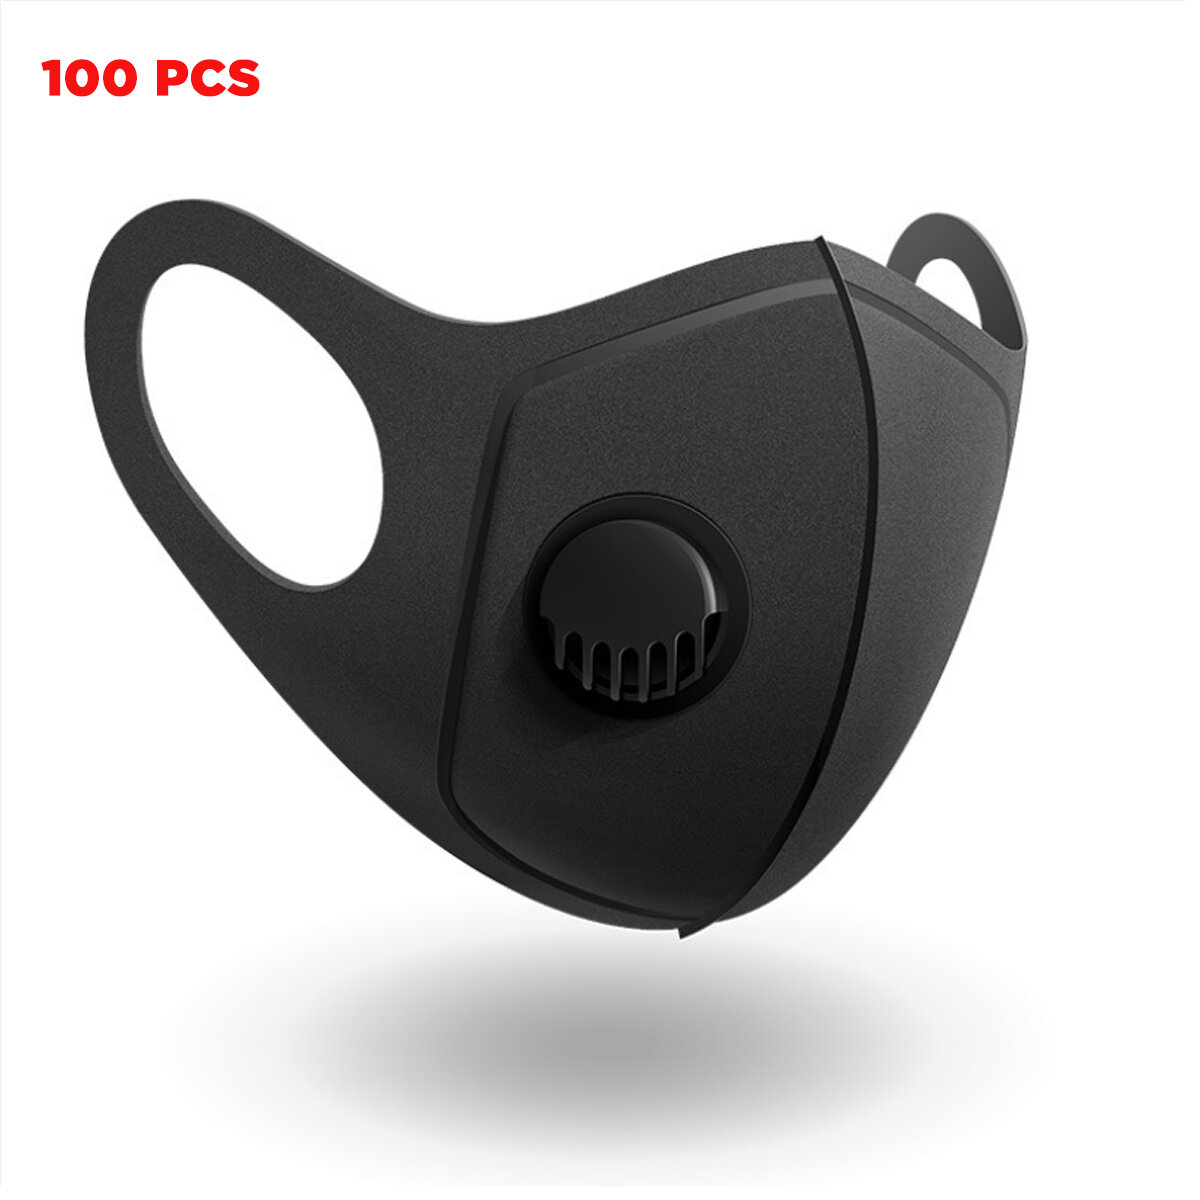 100 Pcs PM2.5 Face Masks Camping Travel Cycling 3 Layer Filter Breathable Anti-dust Mouth Mask